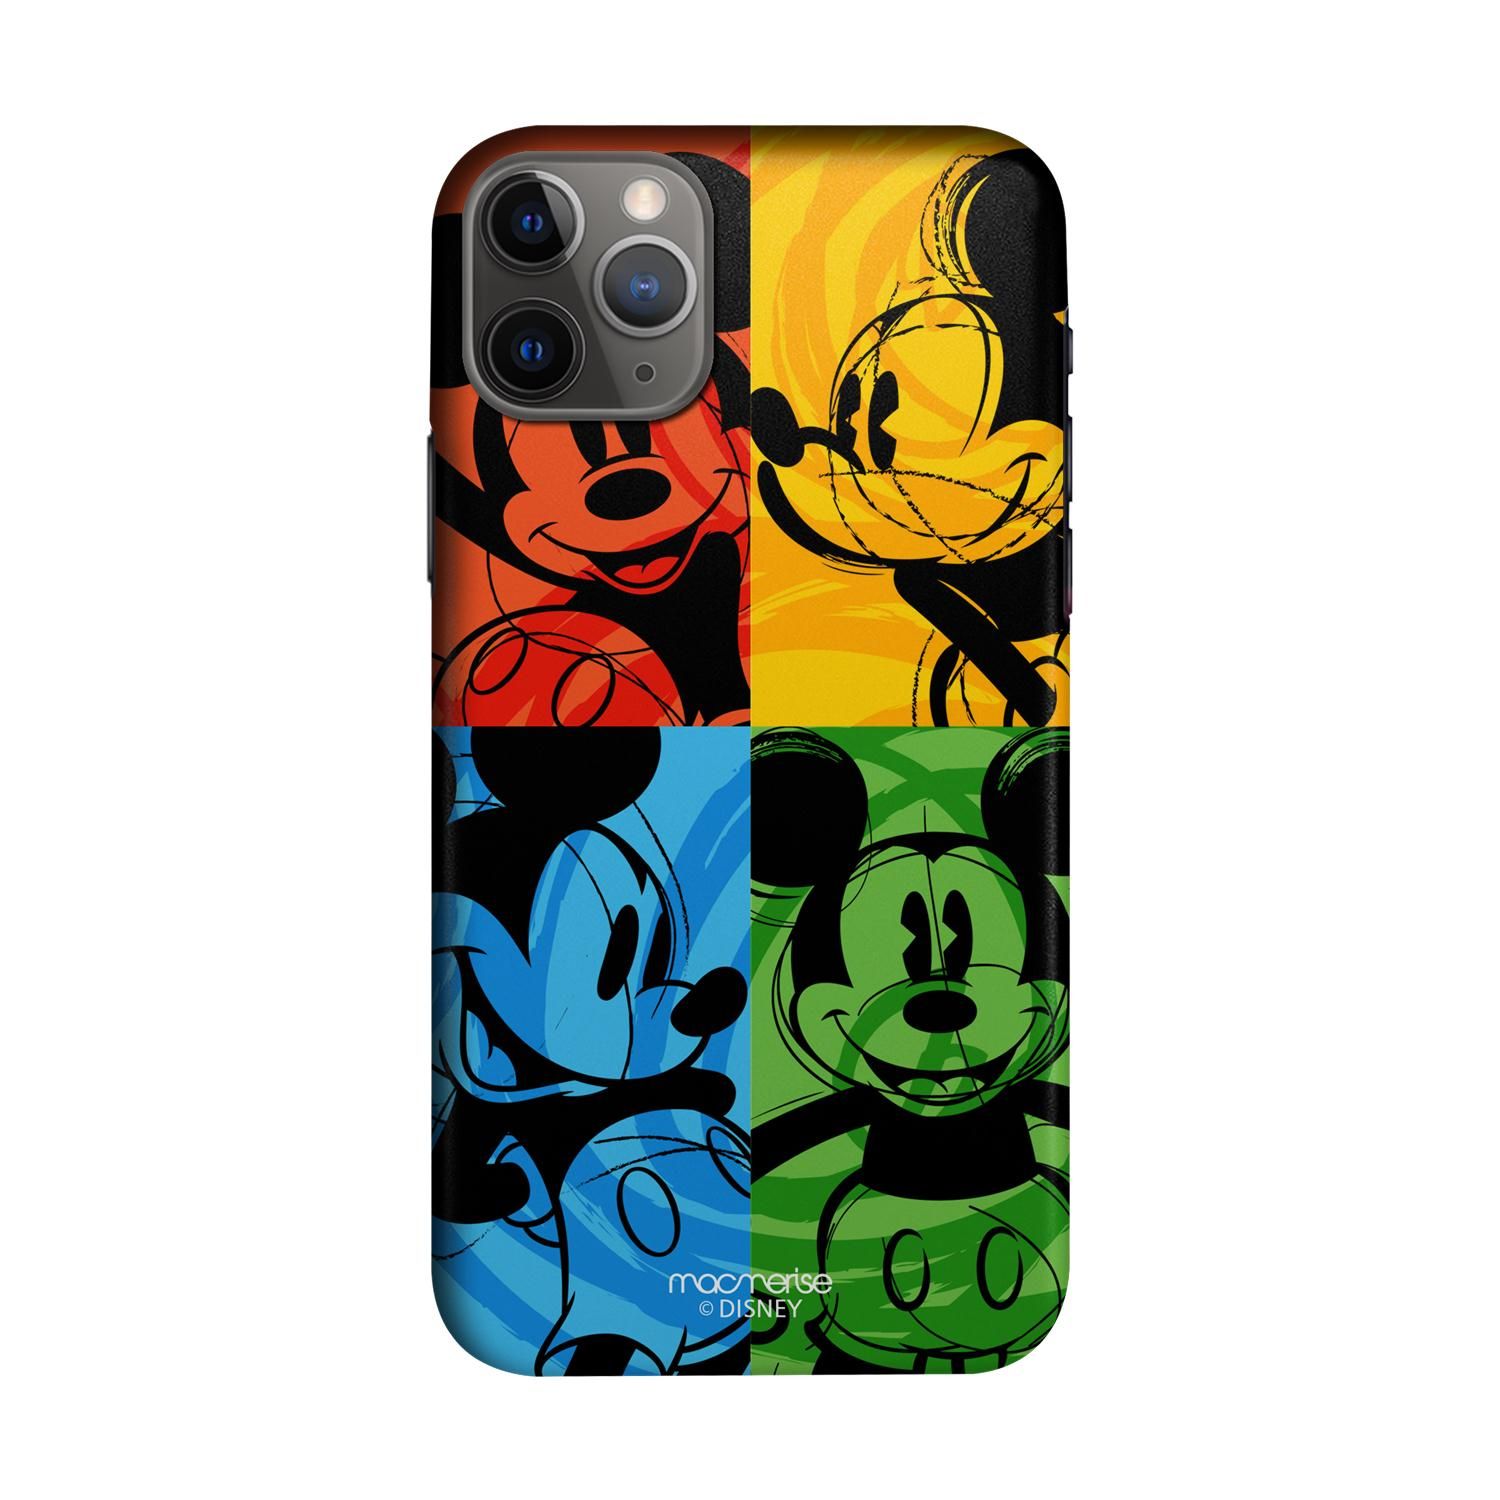 Buy Shades of Mickey - Sleek Phone Case for iPhone 11 Pro Max Online